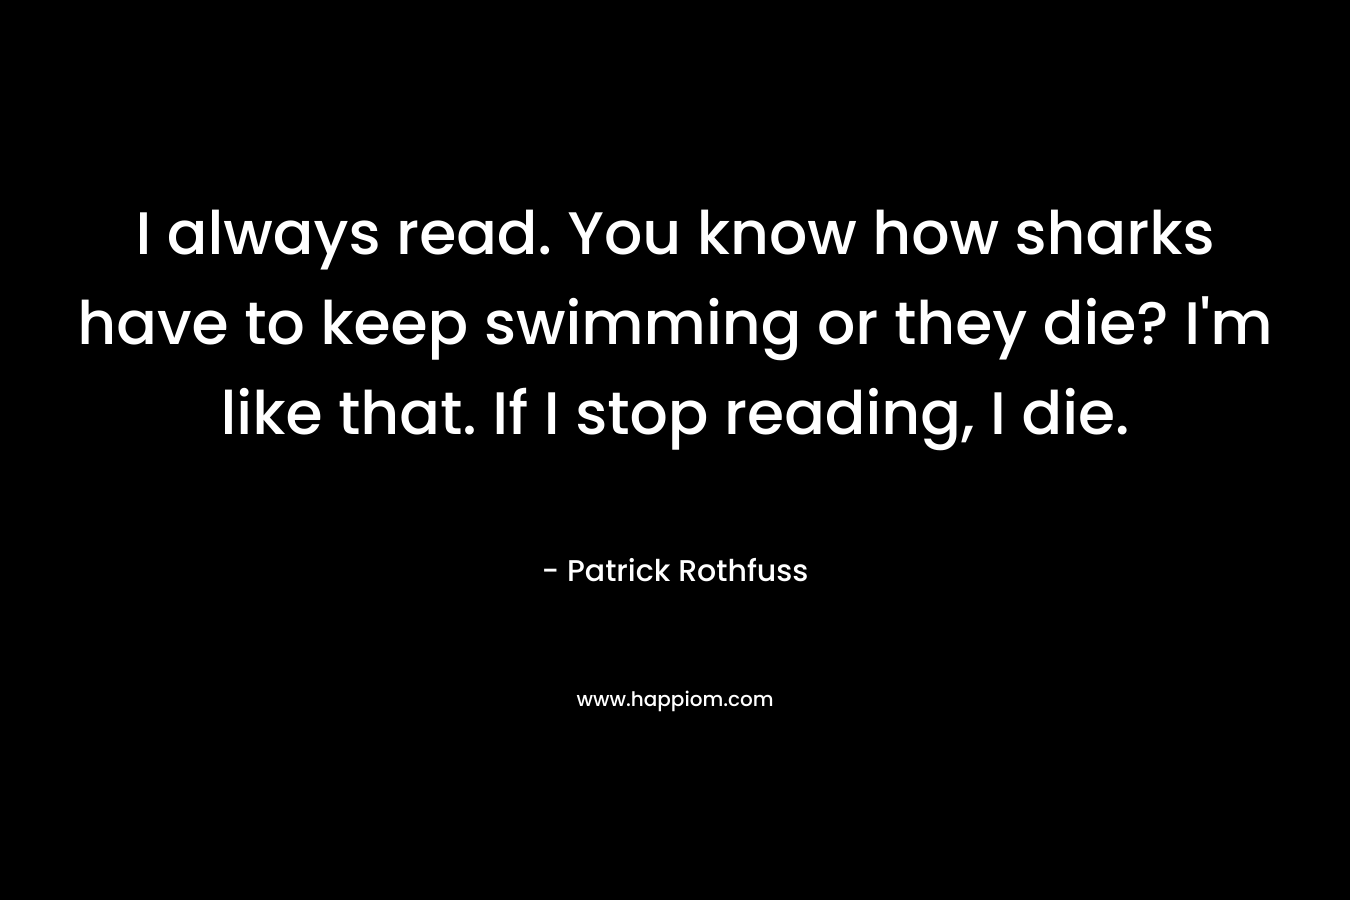 I always read. You know how sharks have to keep swimming or they die? I'm like that. If I stop reading, I die.